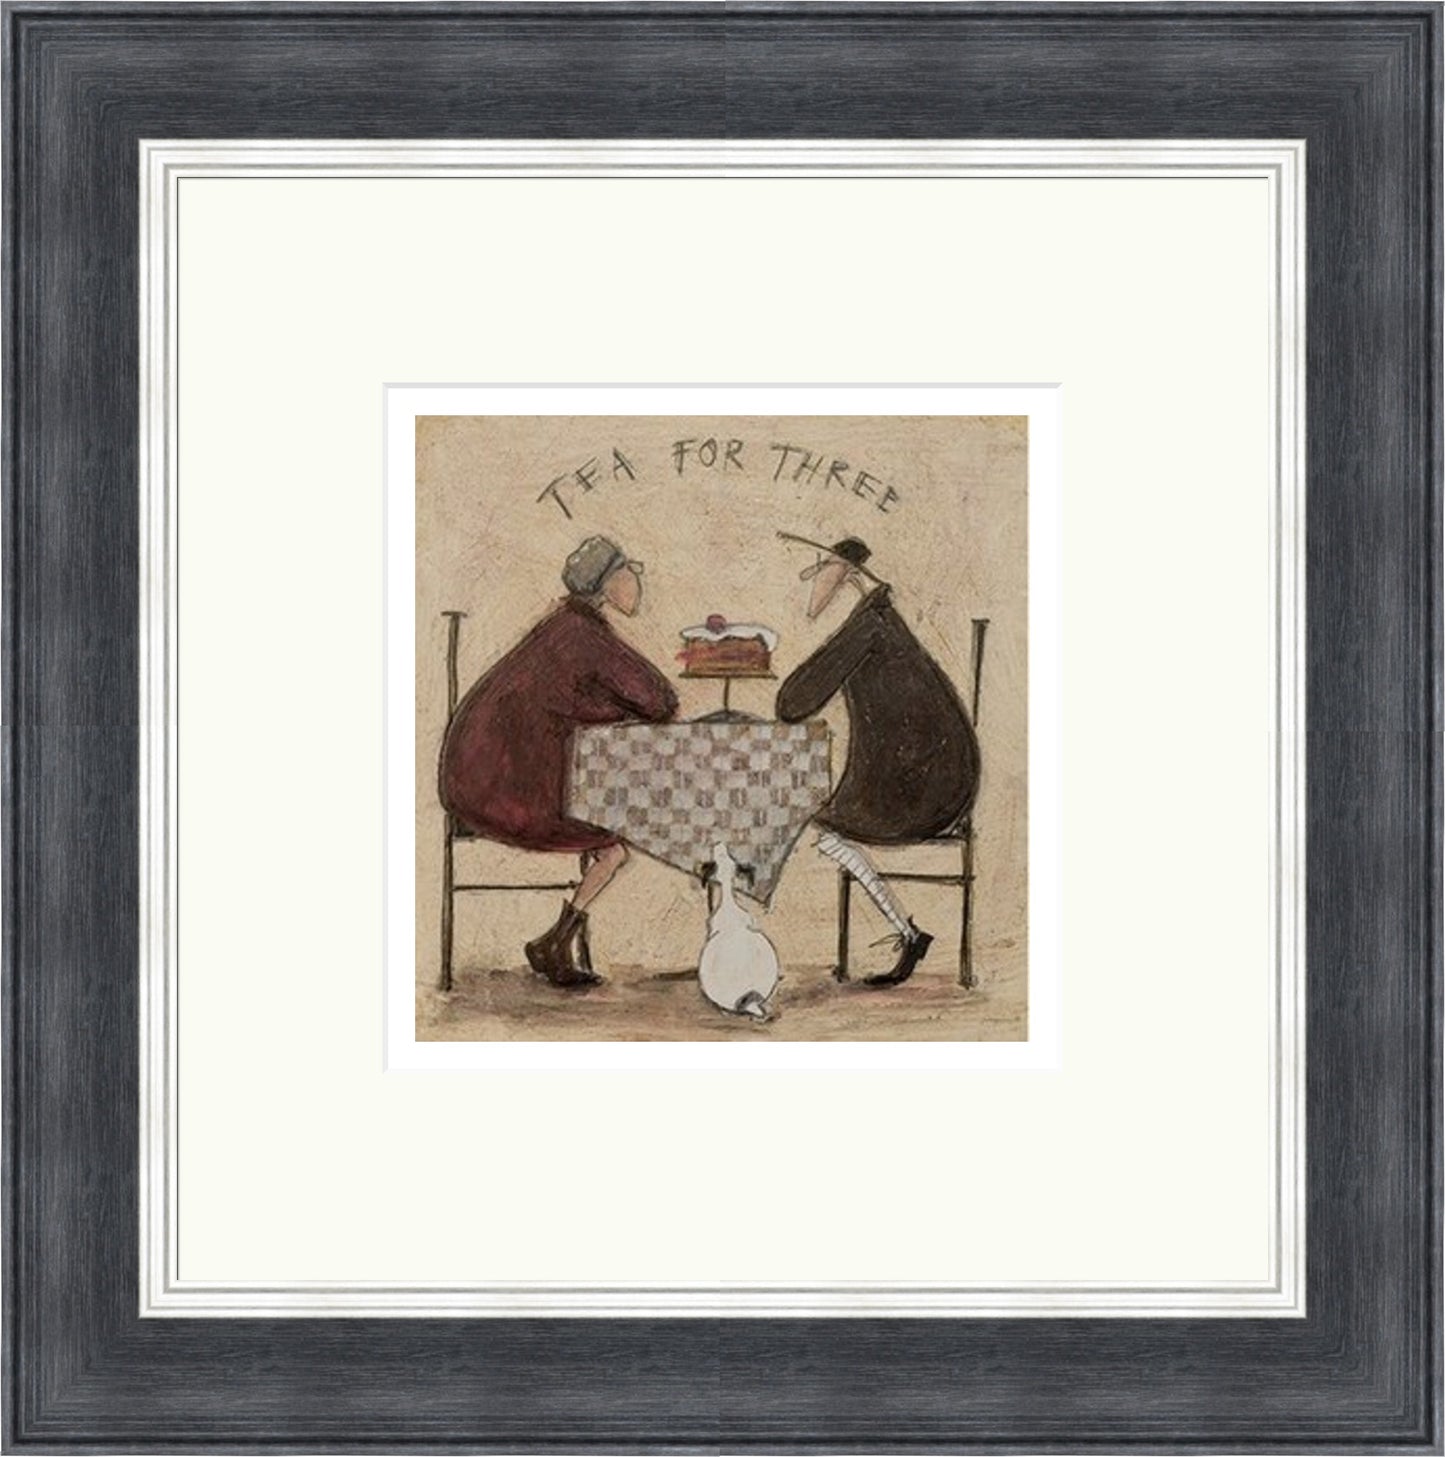 Tea for Three 2 by Sam Toft